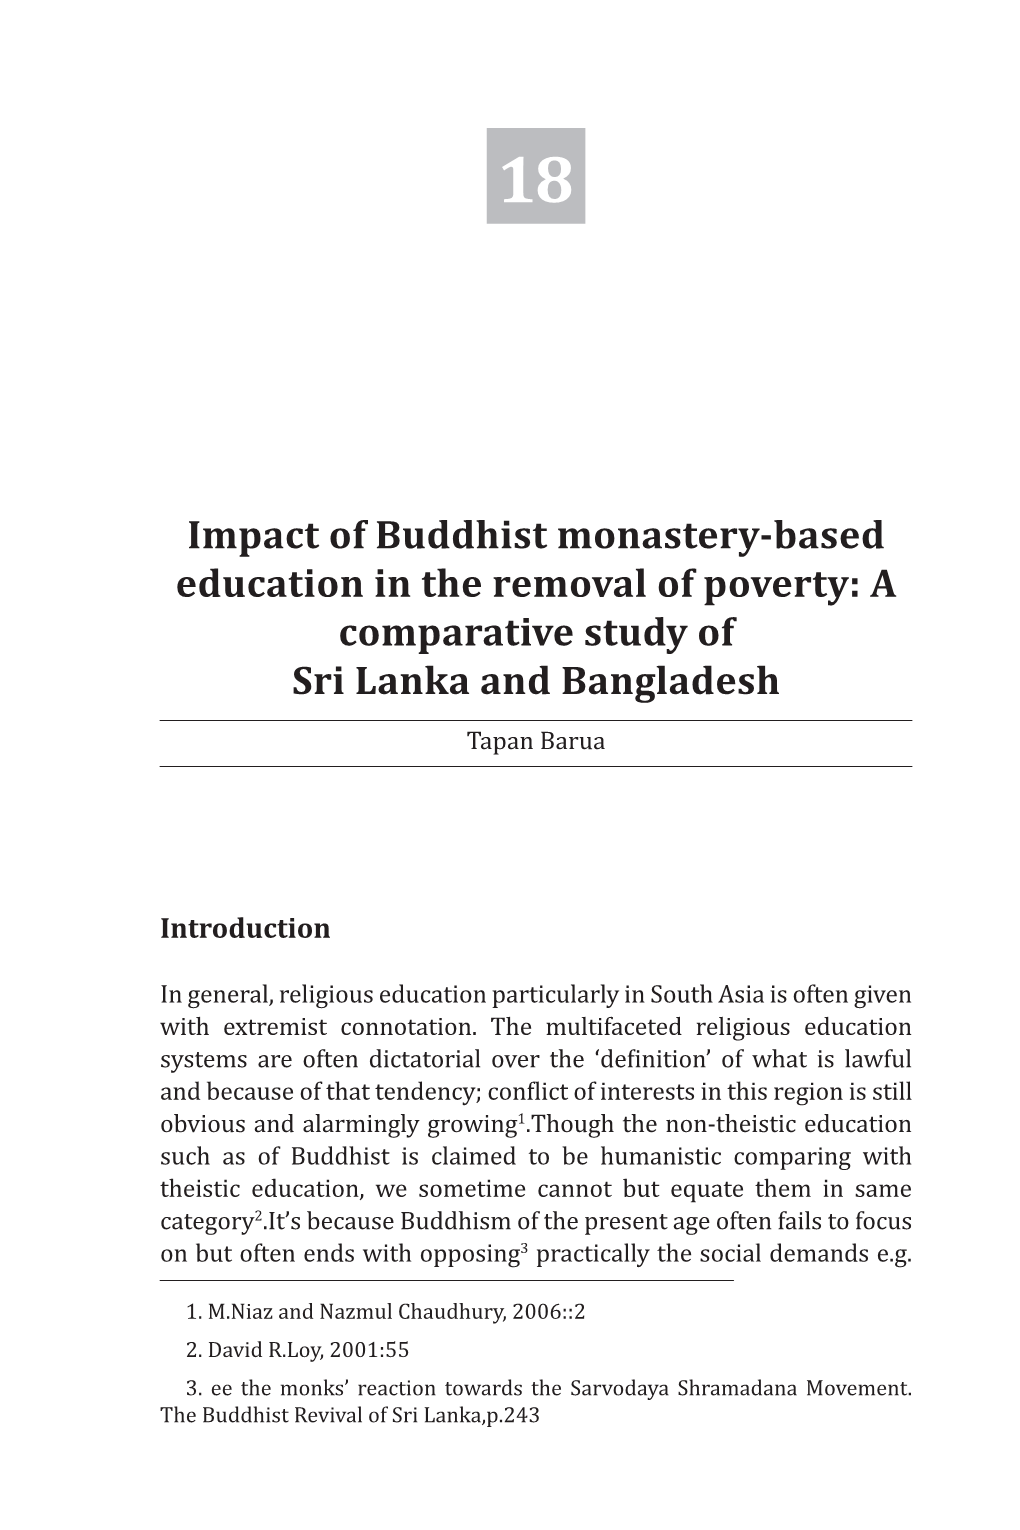 Impact of Buddhist Monastery-Based Education in the Removal of Poverty: a Comparative Study of Sri Lanka and Bangladesh Tapan Barua